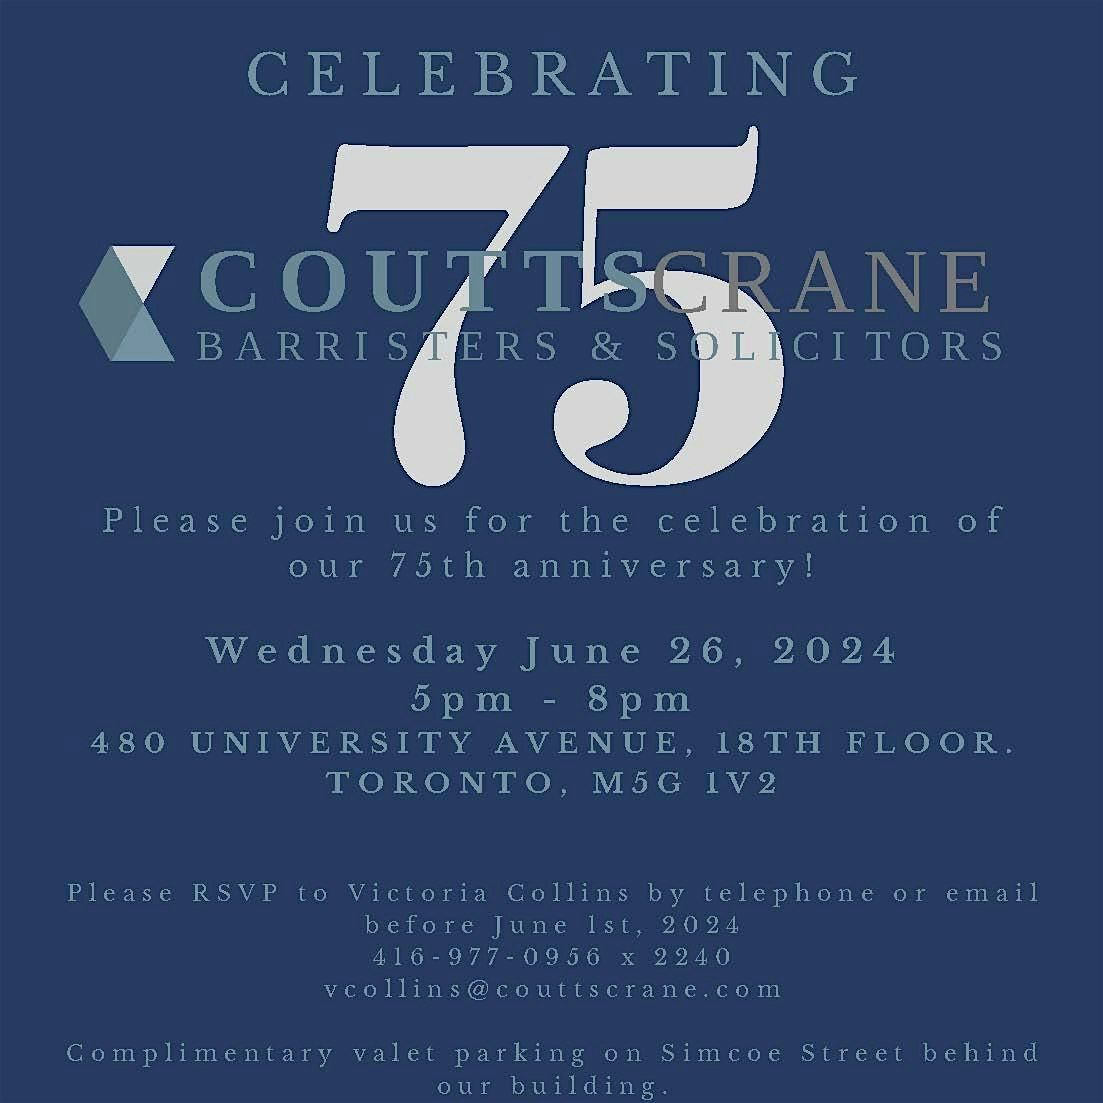 Coutts Crane's 75th Anniversary